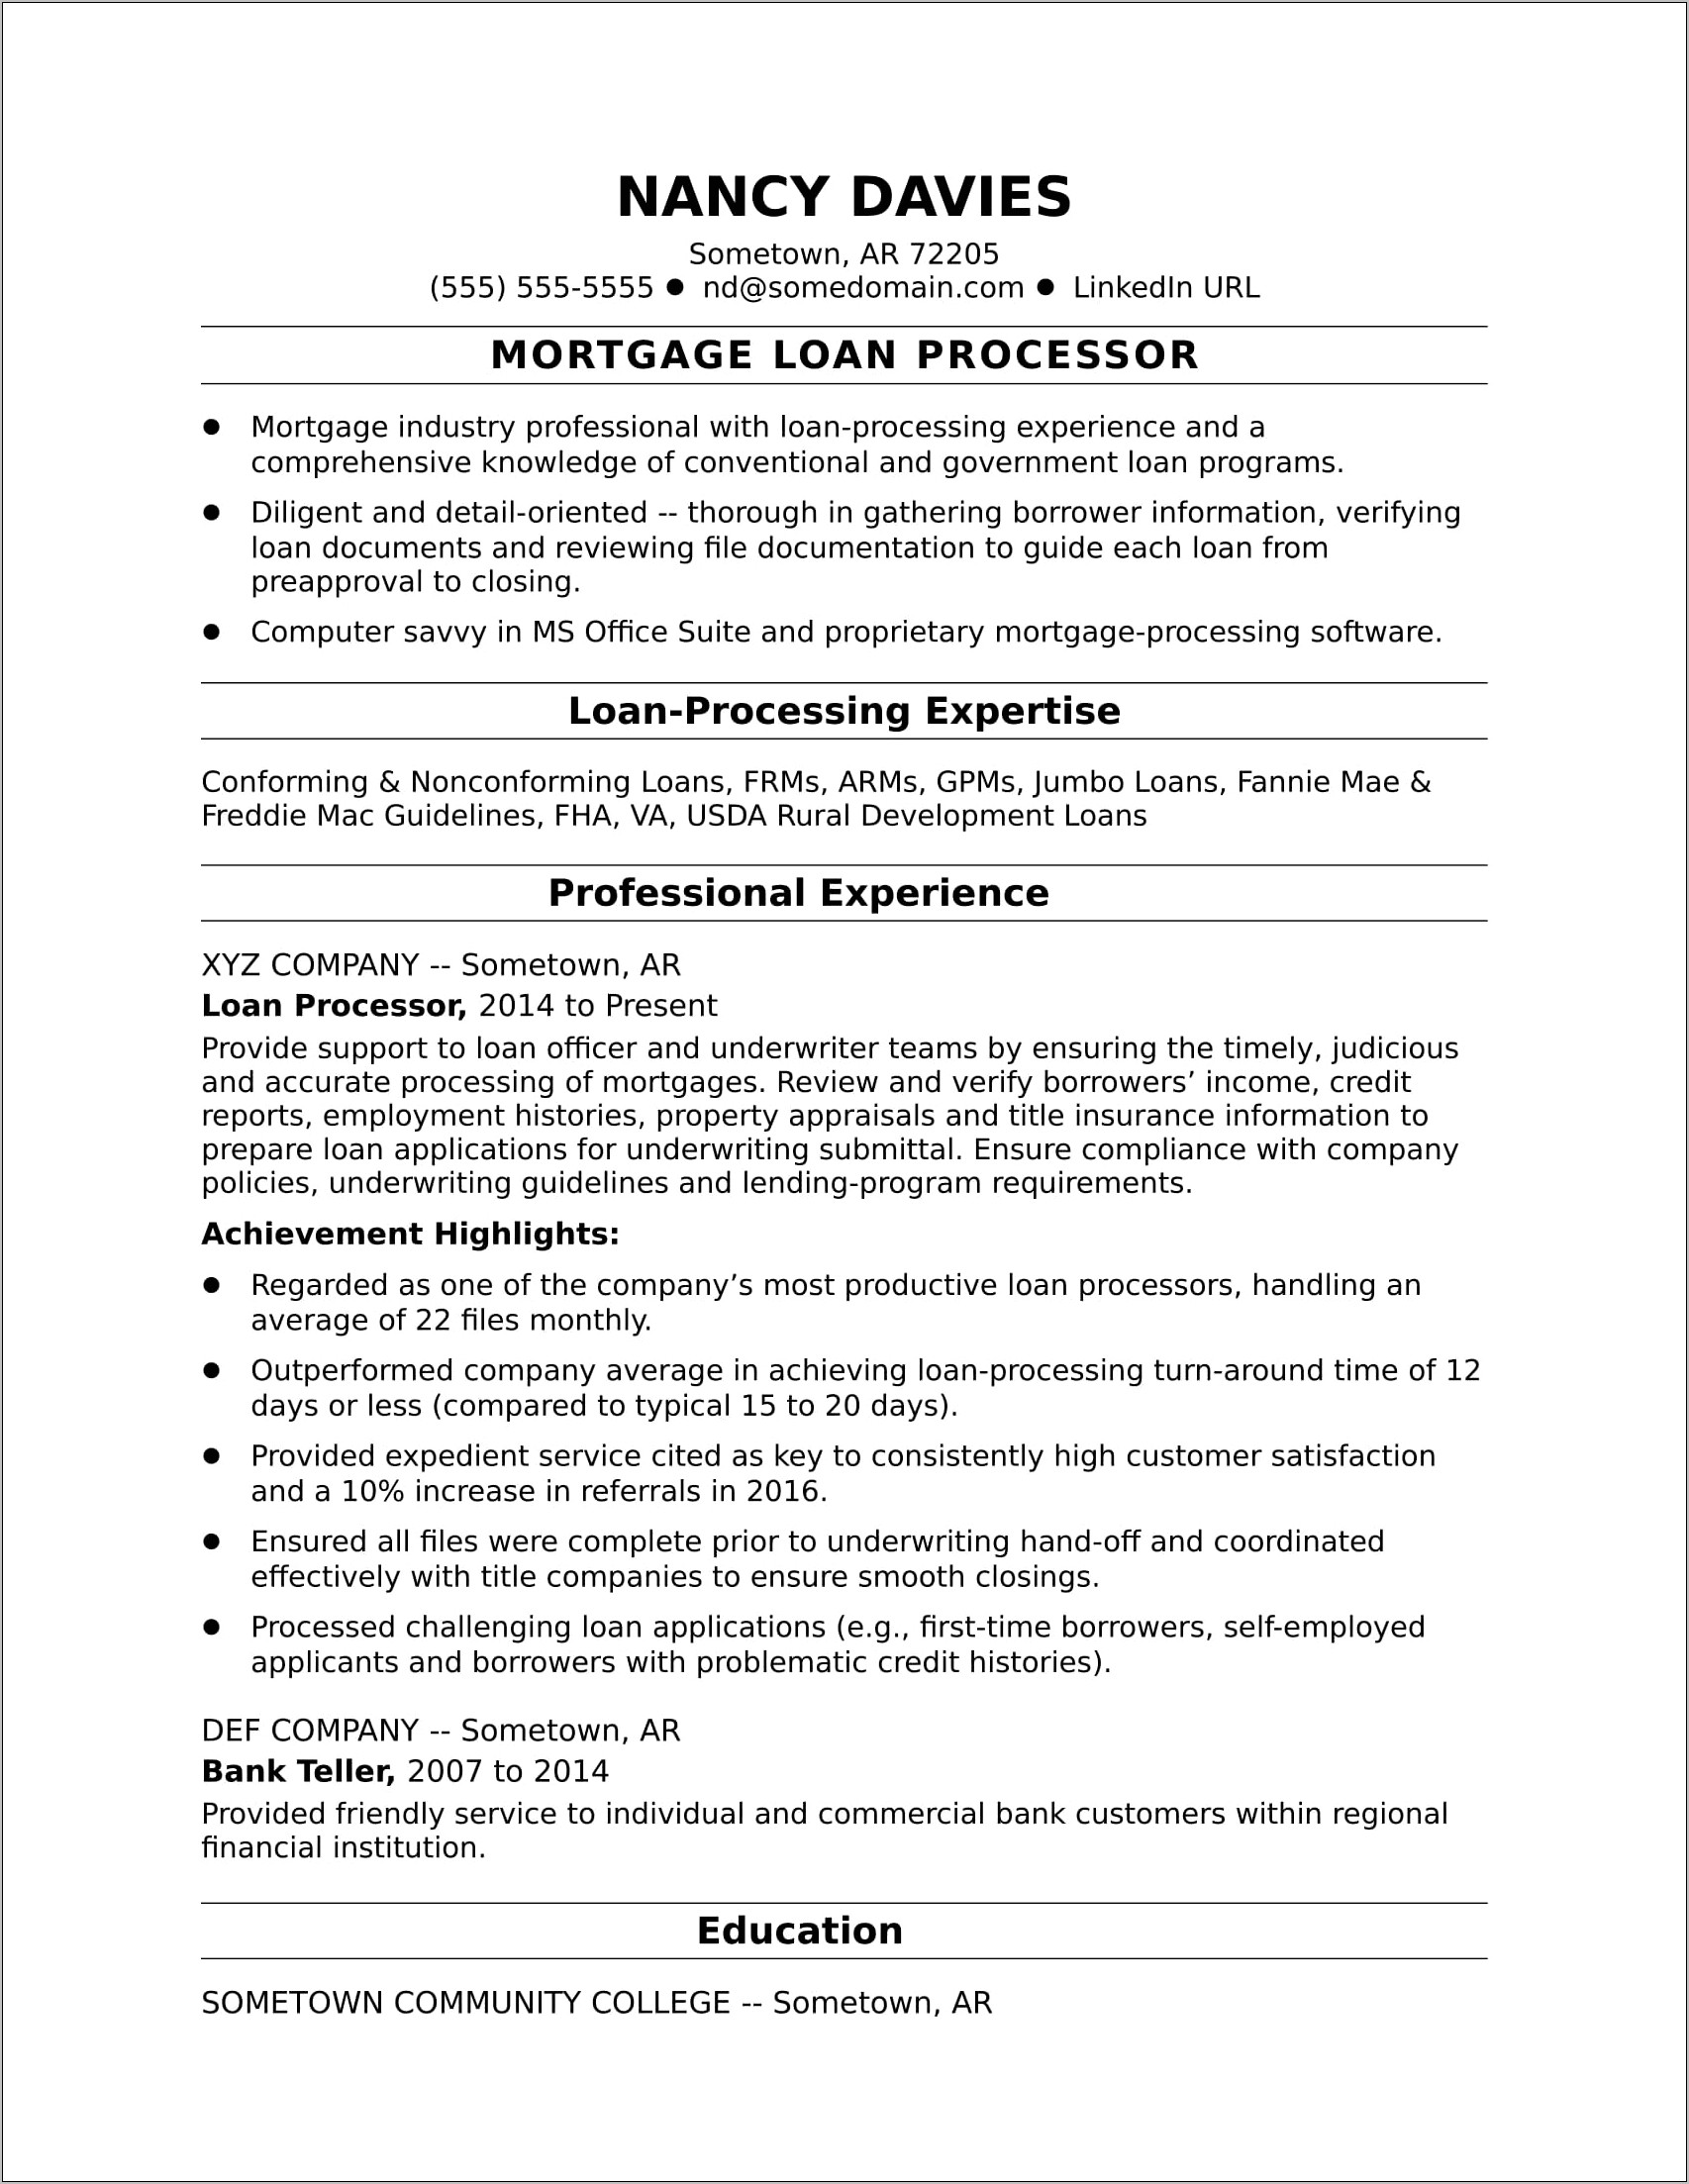 Resume Objective Sample For Credit Union